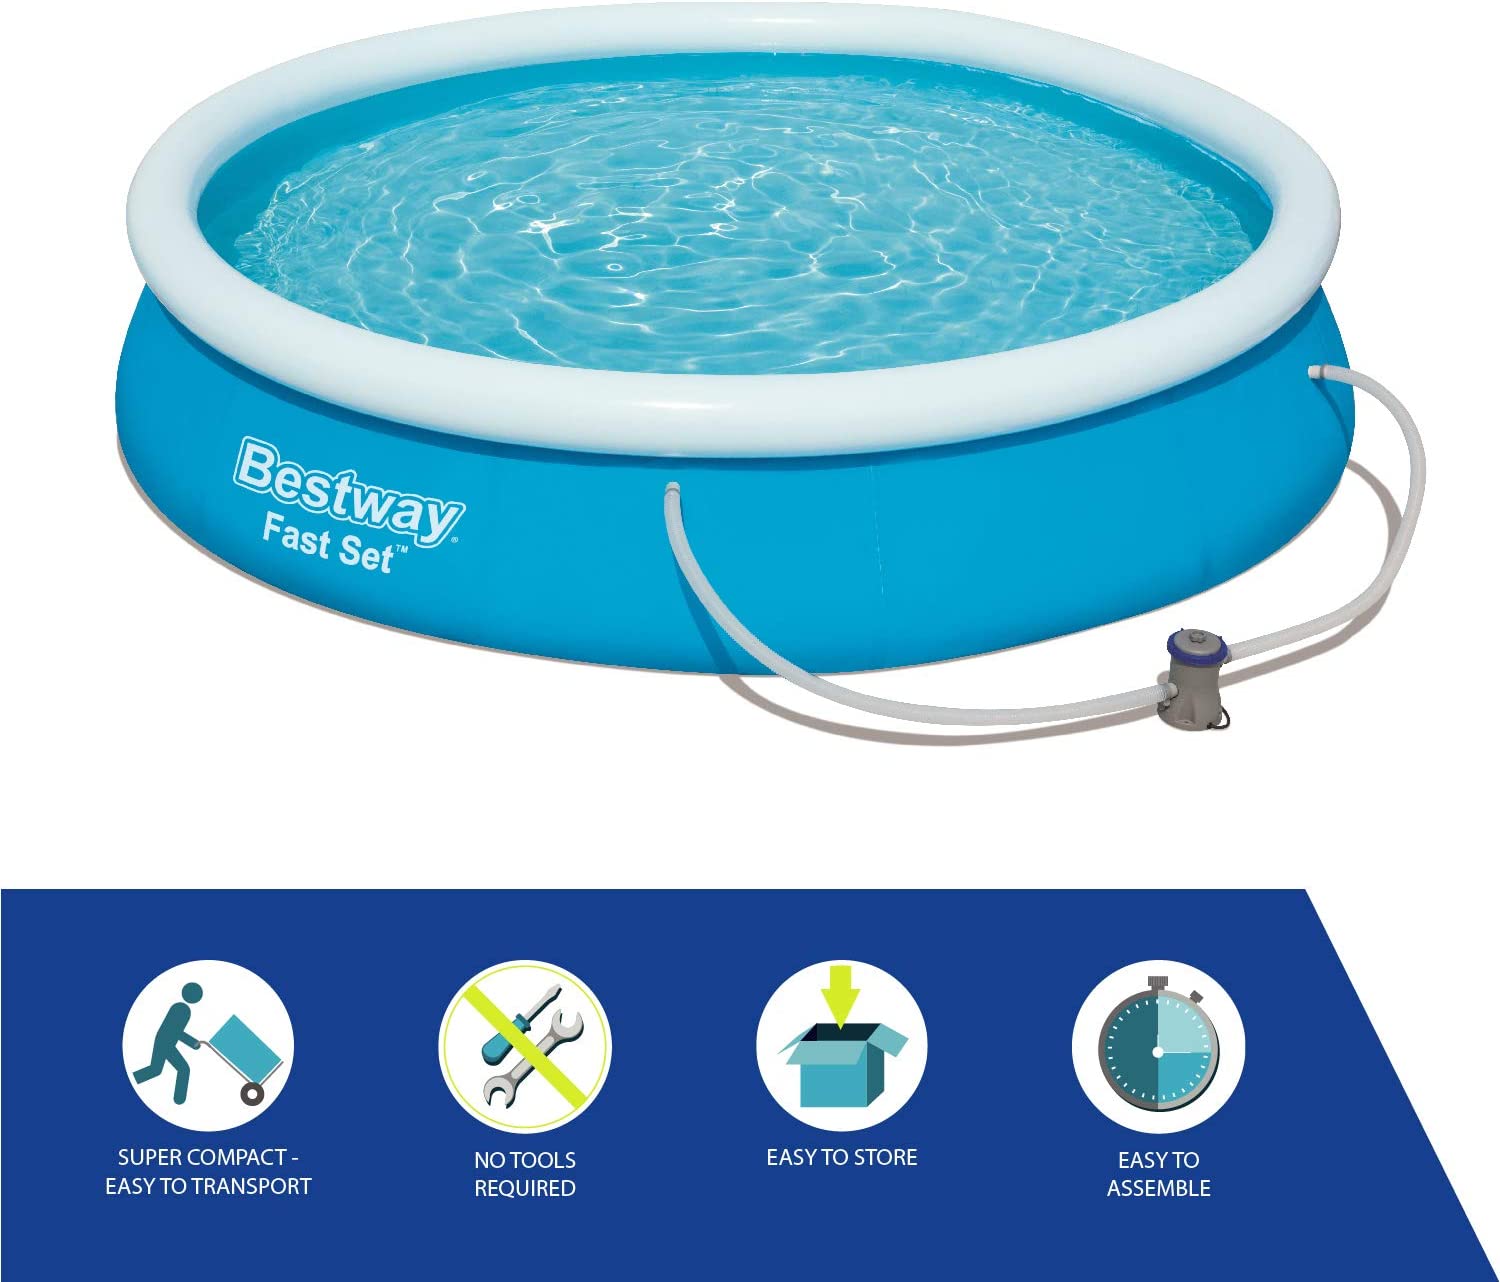 Bestway 57274 Round Kids Inflatable Paddling Pool with Filter Pump, Fast Set, 12 ft 1387